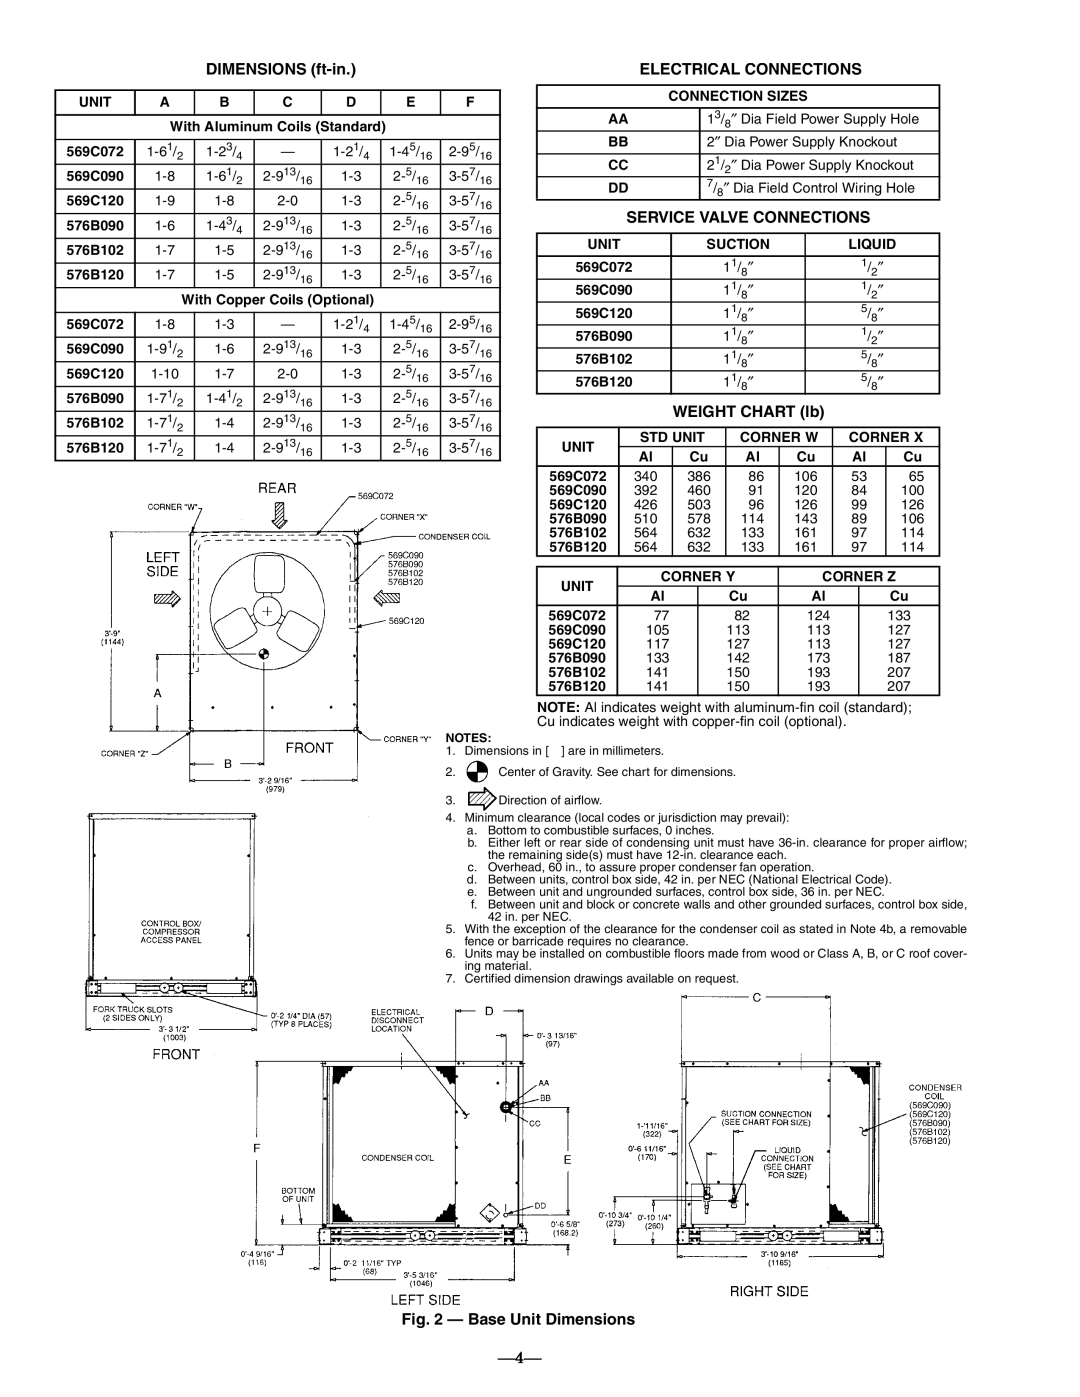 Bryant 576b DIMENSIONS ft-in, Electrical Connections, Service Valve Connections, WEIGHT CHART lb, Base Unit Dimensions 